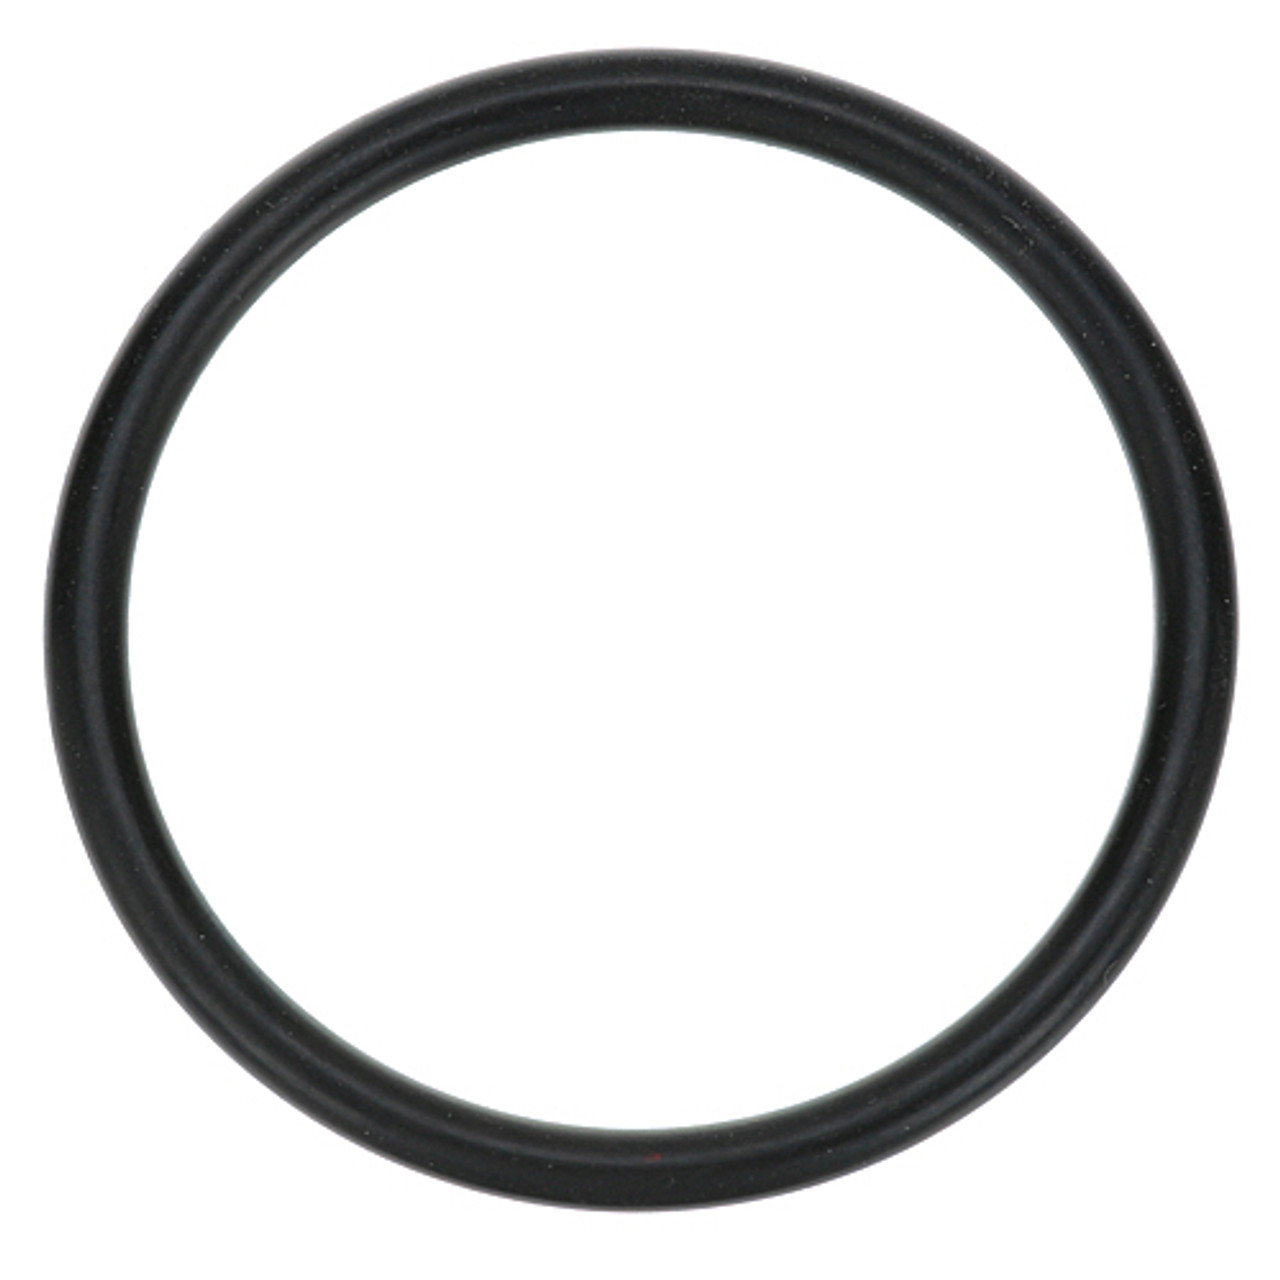 O-Ring (2-7/8 Od) - Replacement Part For Hobart 00-67500-119